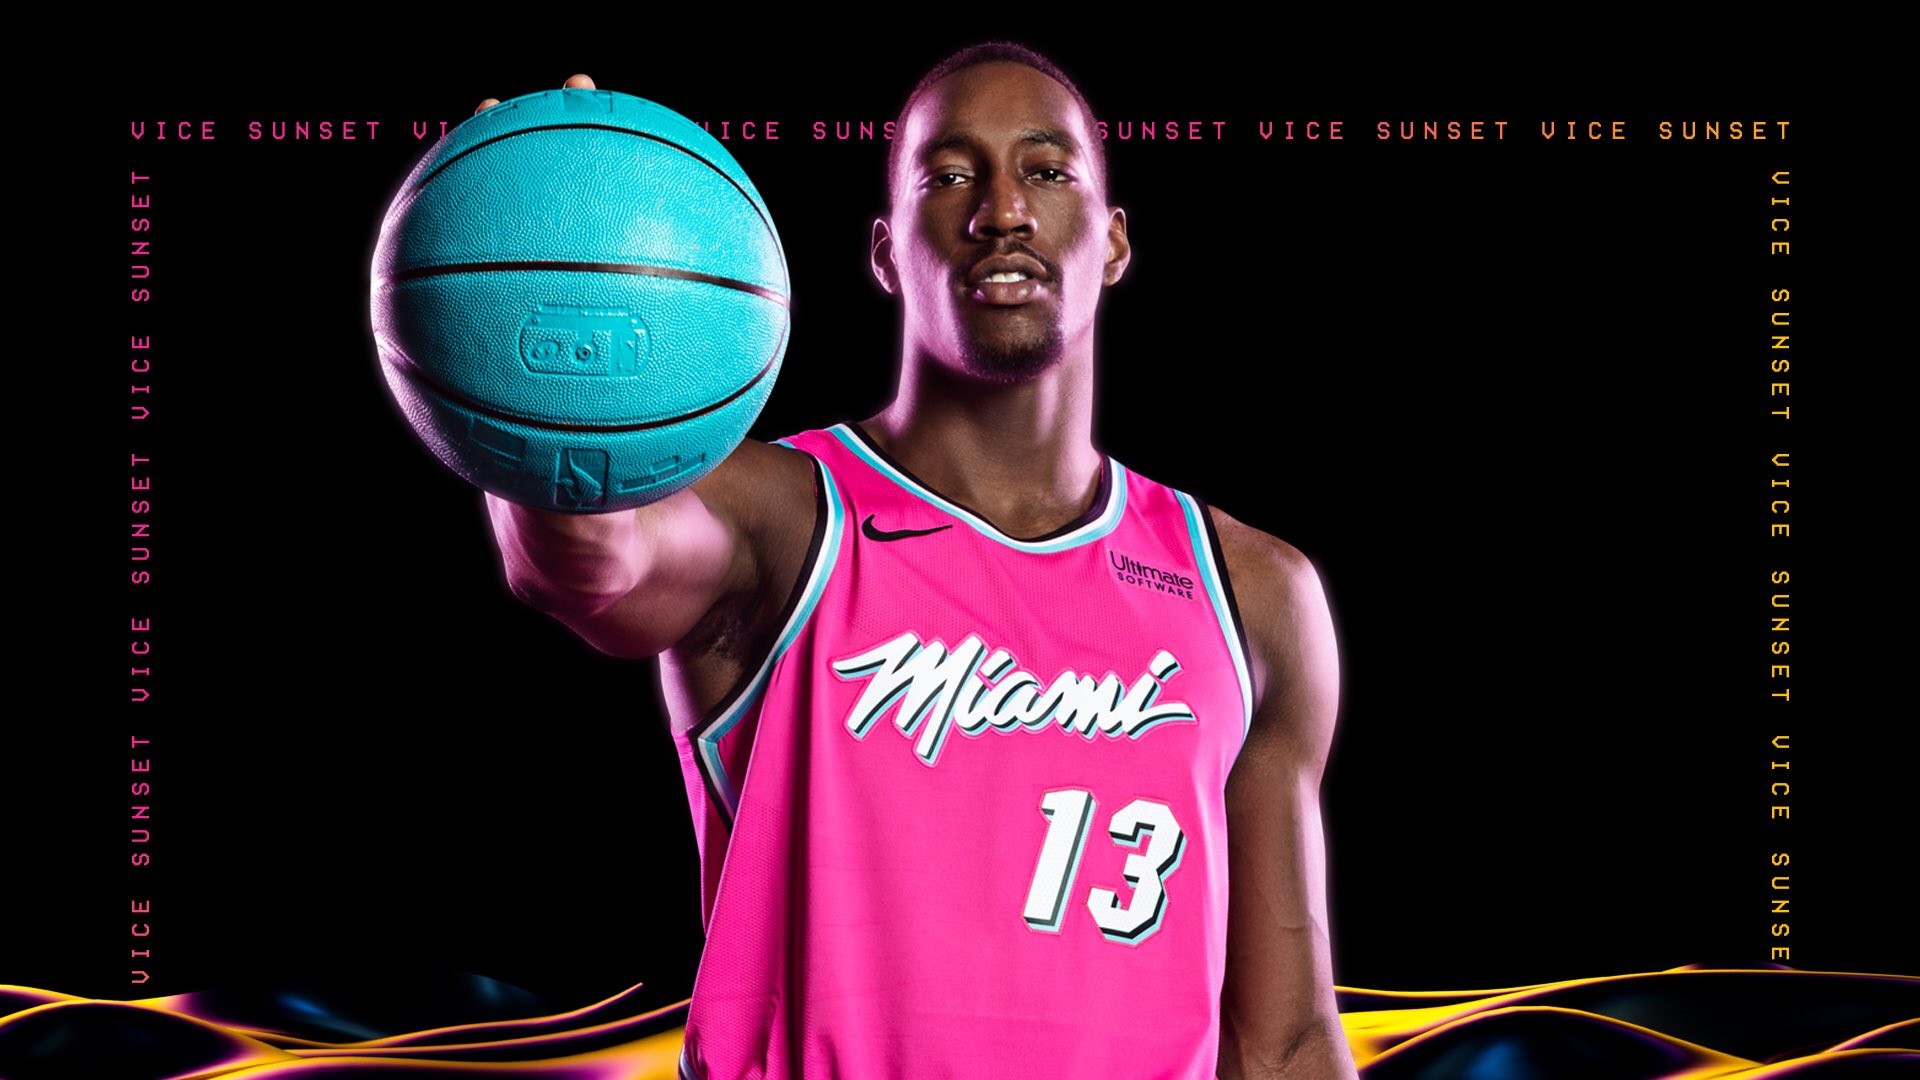 Free Download Miami Heat Unveils Pink Sunset Vice Jerseys Miami New Times 1920x1080 For Your Desktop Mobile Tablet Explore 66 Miami Heat Logo Wallpaper 2015 Miami Heat Wallpaper Logo